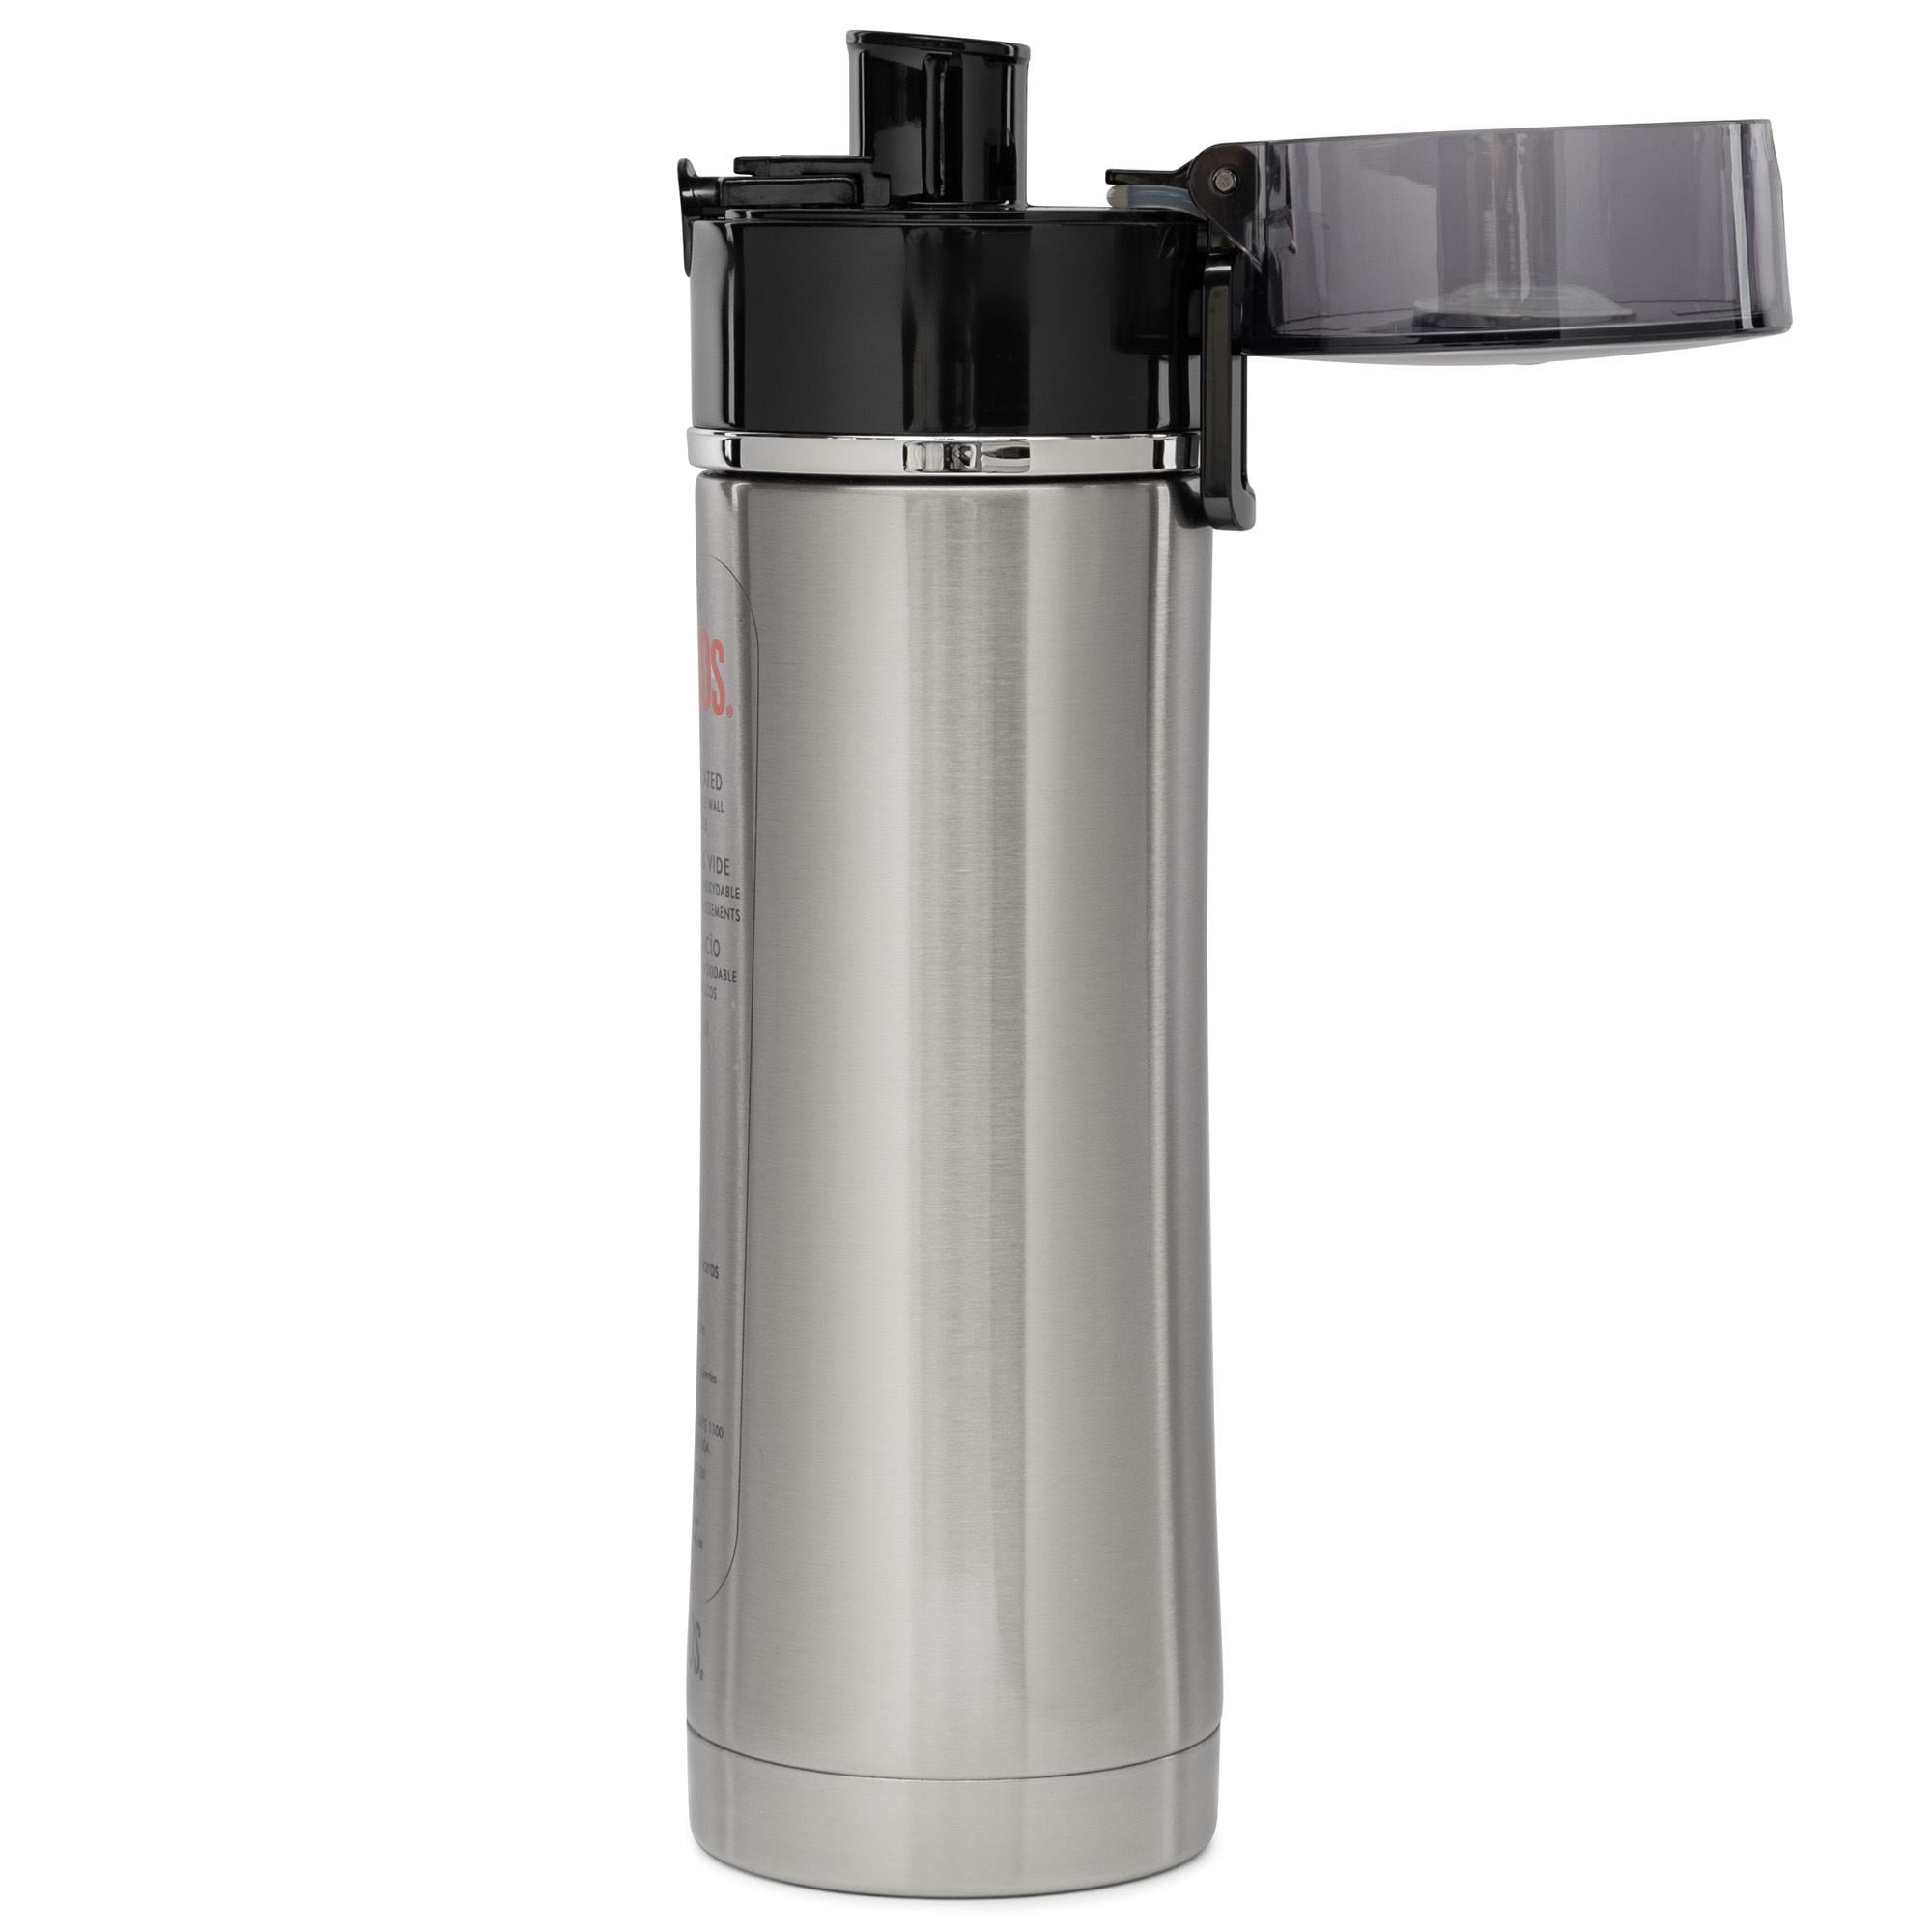 Thermos Sipp Vacuum Insulated Drink Bottle 16 oz SS/Black #NS402BK4